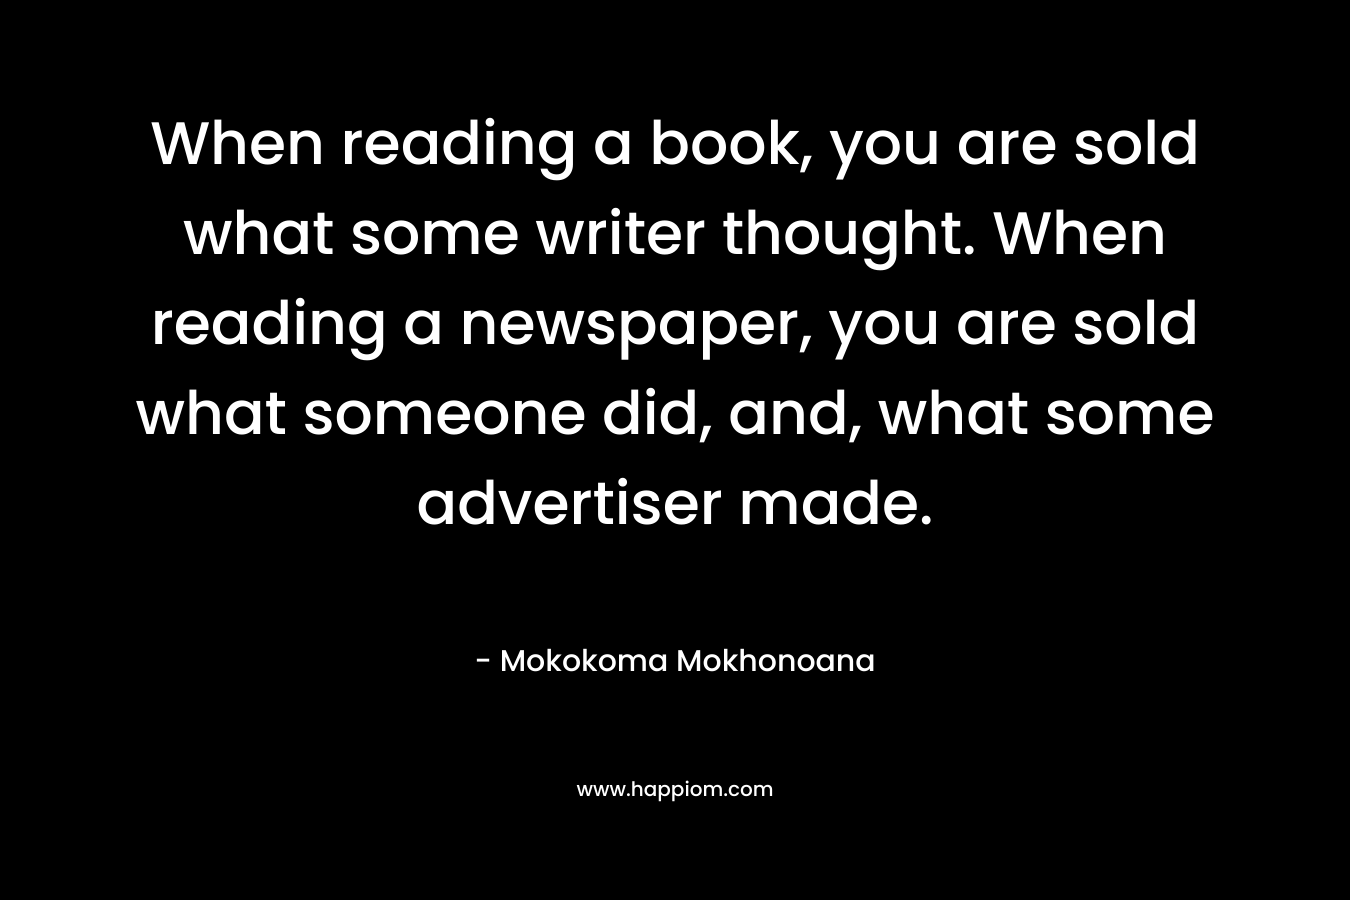 When reading a book, you are sold what some writer thought. When reading a newspaper, you are sold what someone did, and, what some advertiser made.